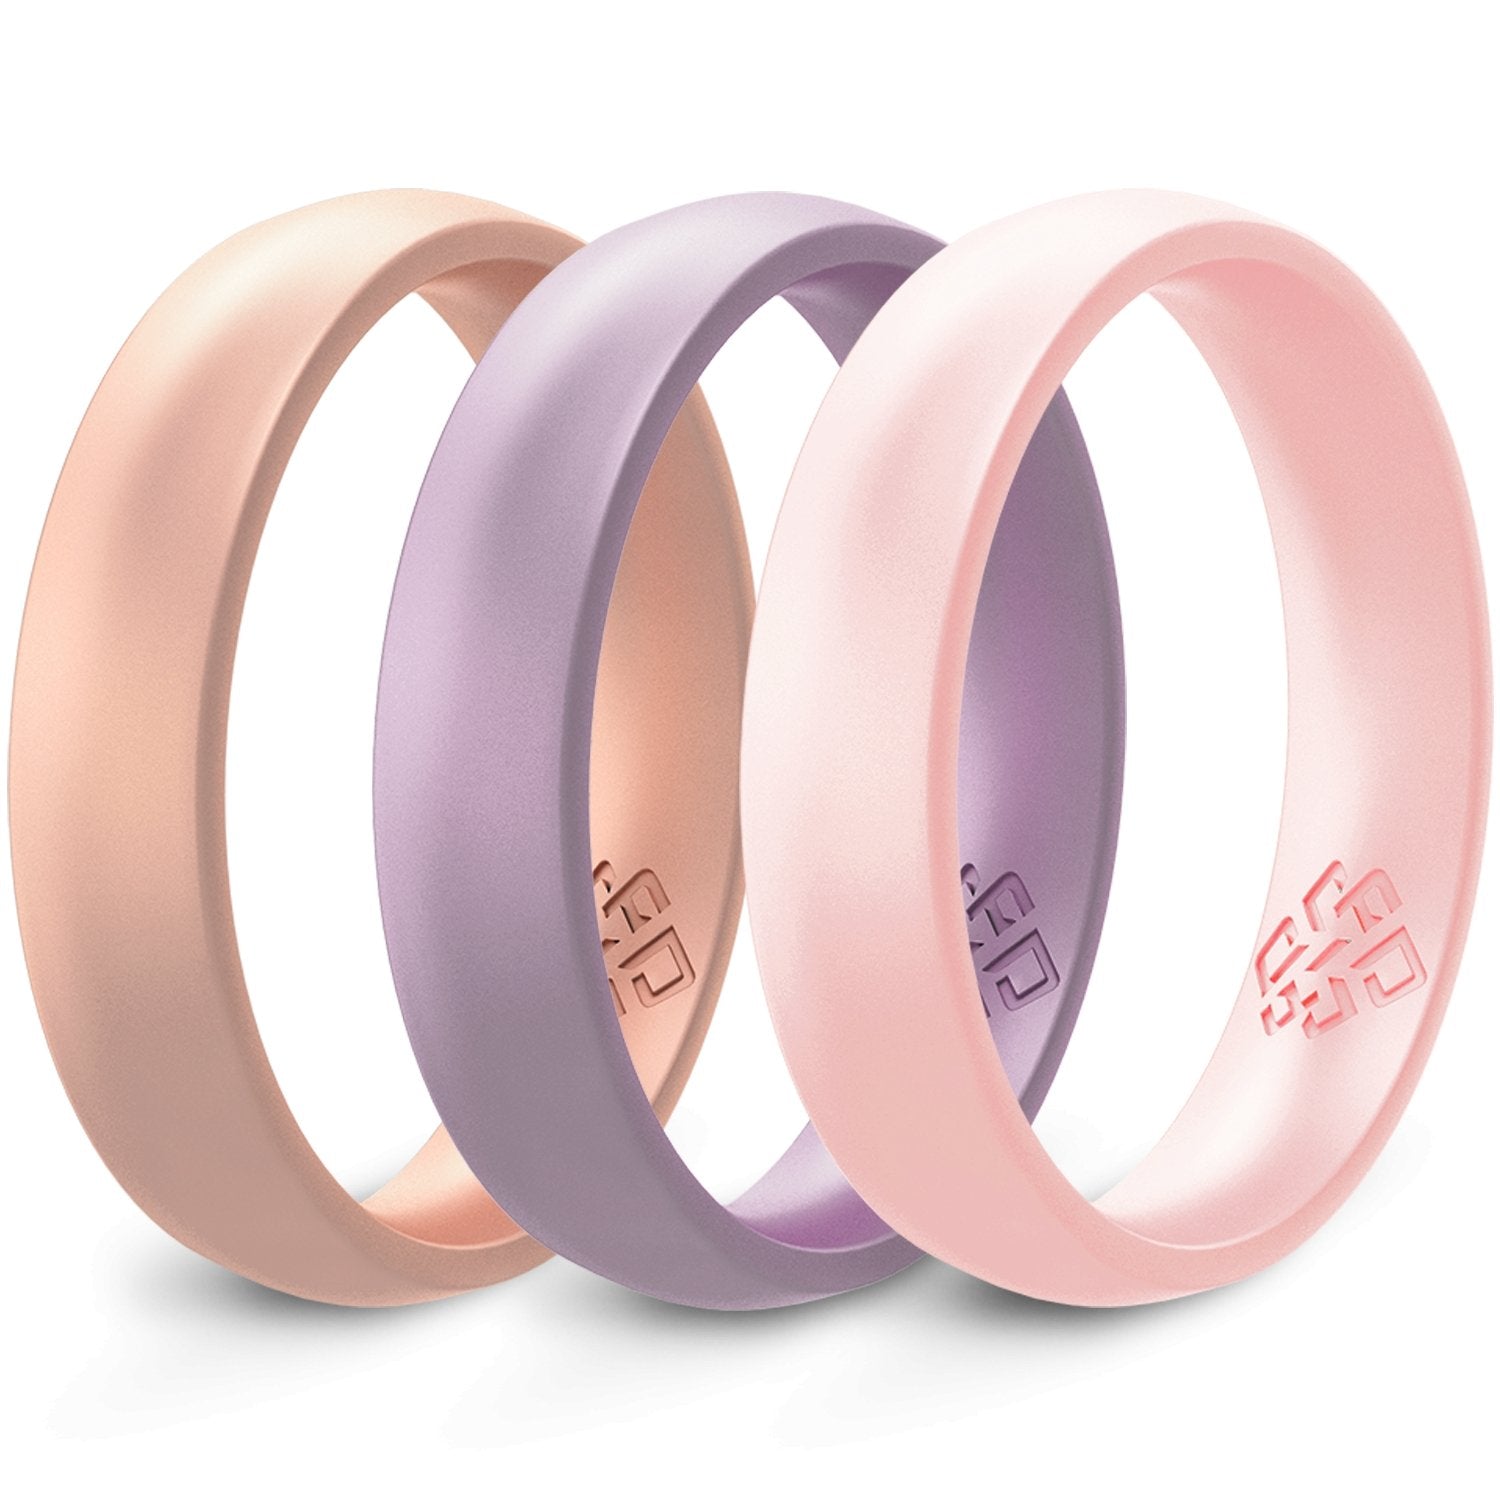 Vanilla Sky Stackable 3-Pack Silicone Ring for Women - Knot Theory